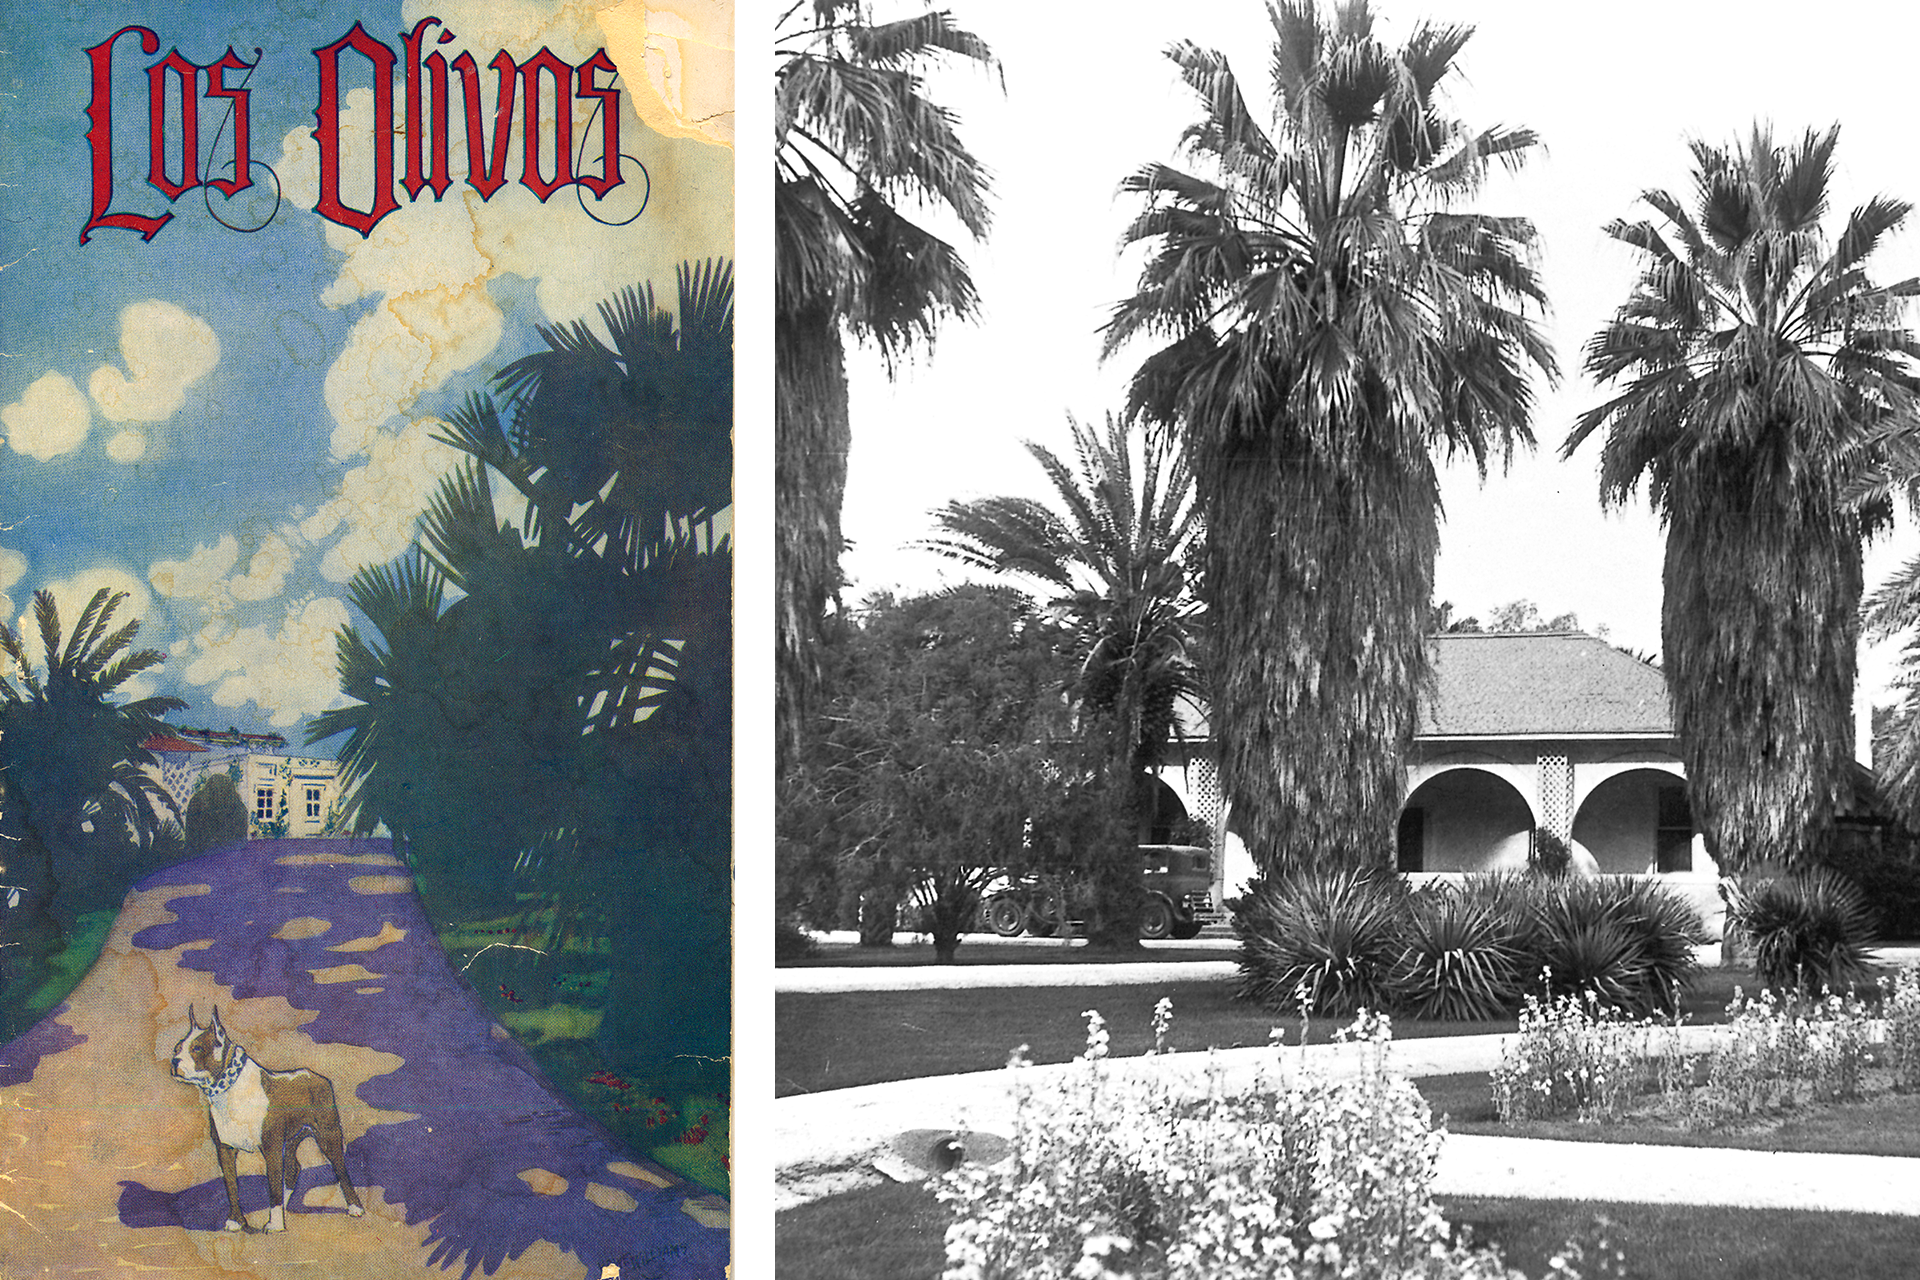 A black and white photo of a park with palm trees and a sign that says los olivos.